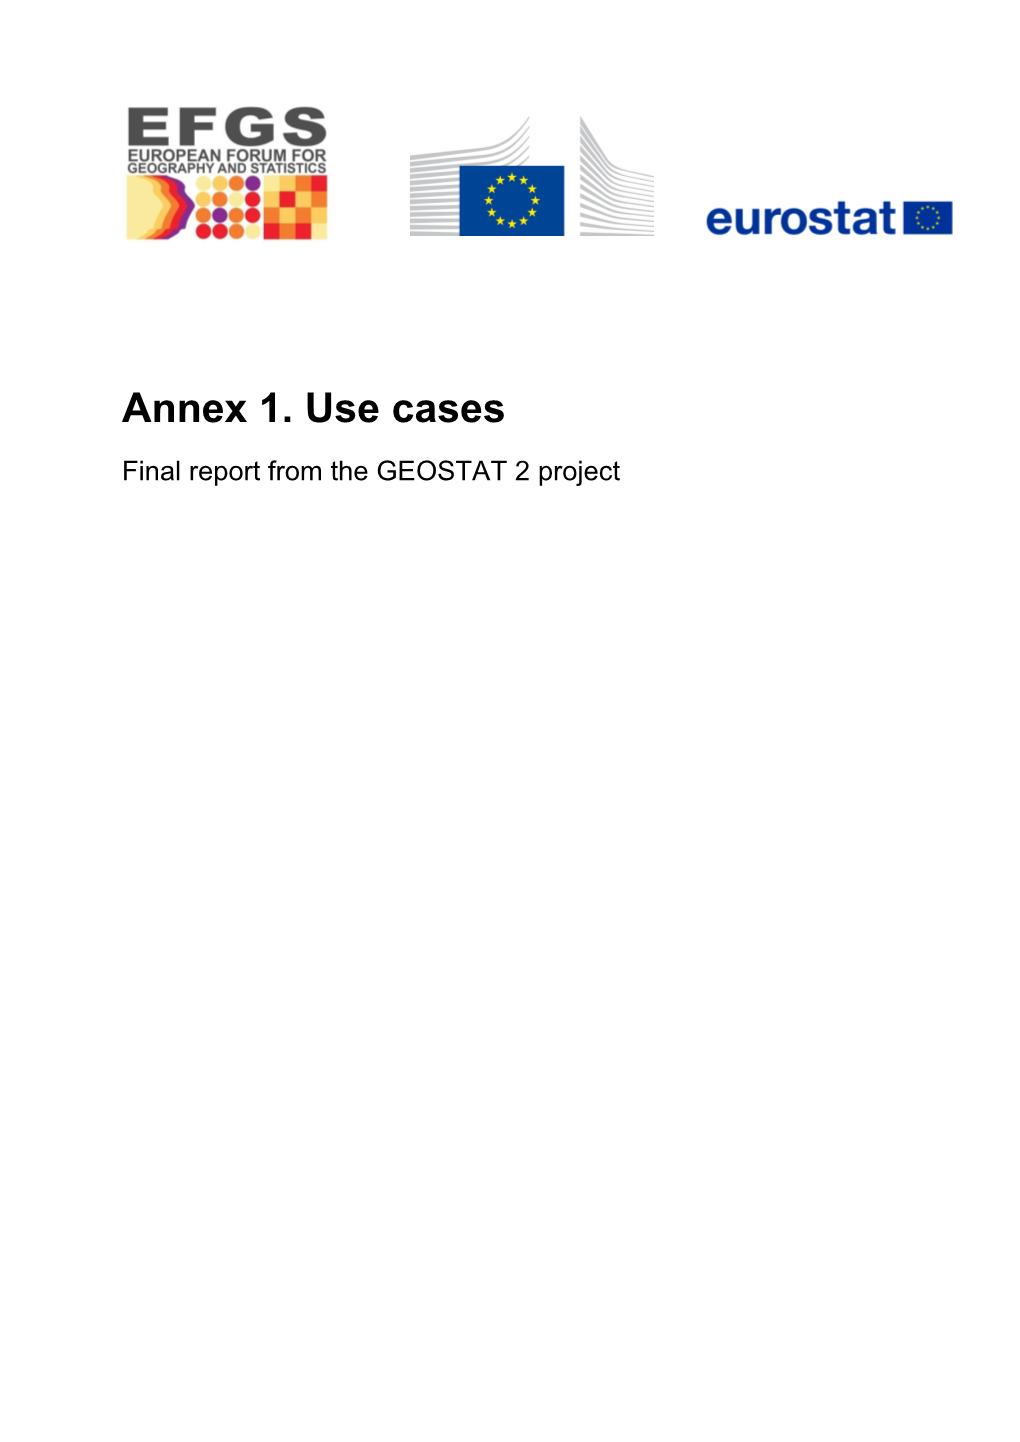 Annex 1. Use Cases – Final Report from the GEOSTAT 2 Project